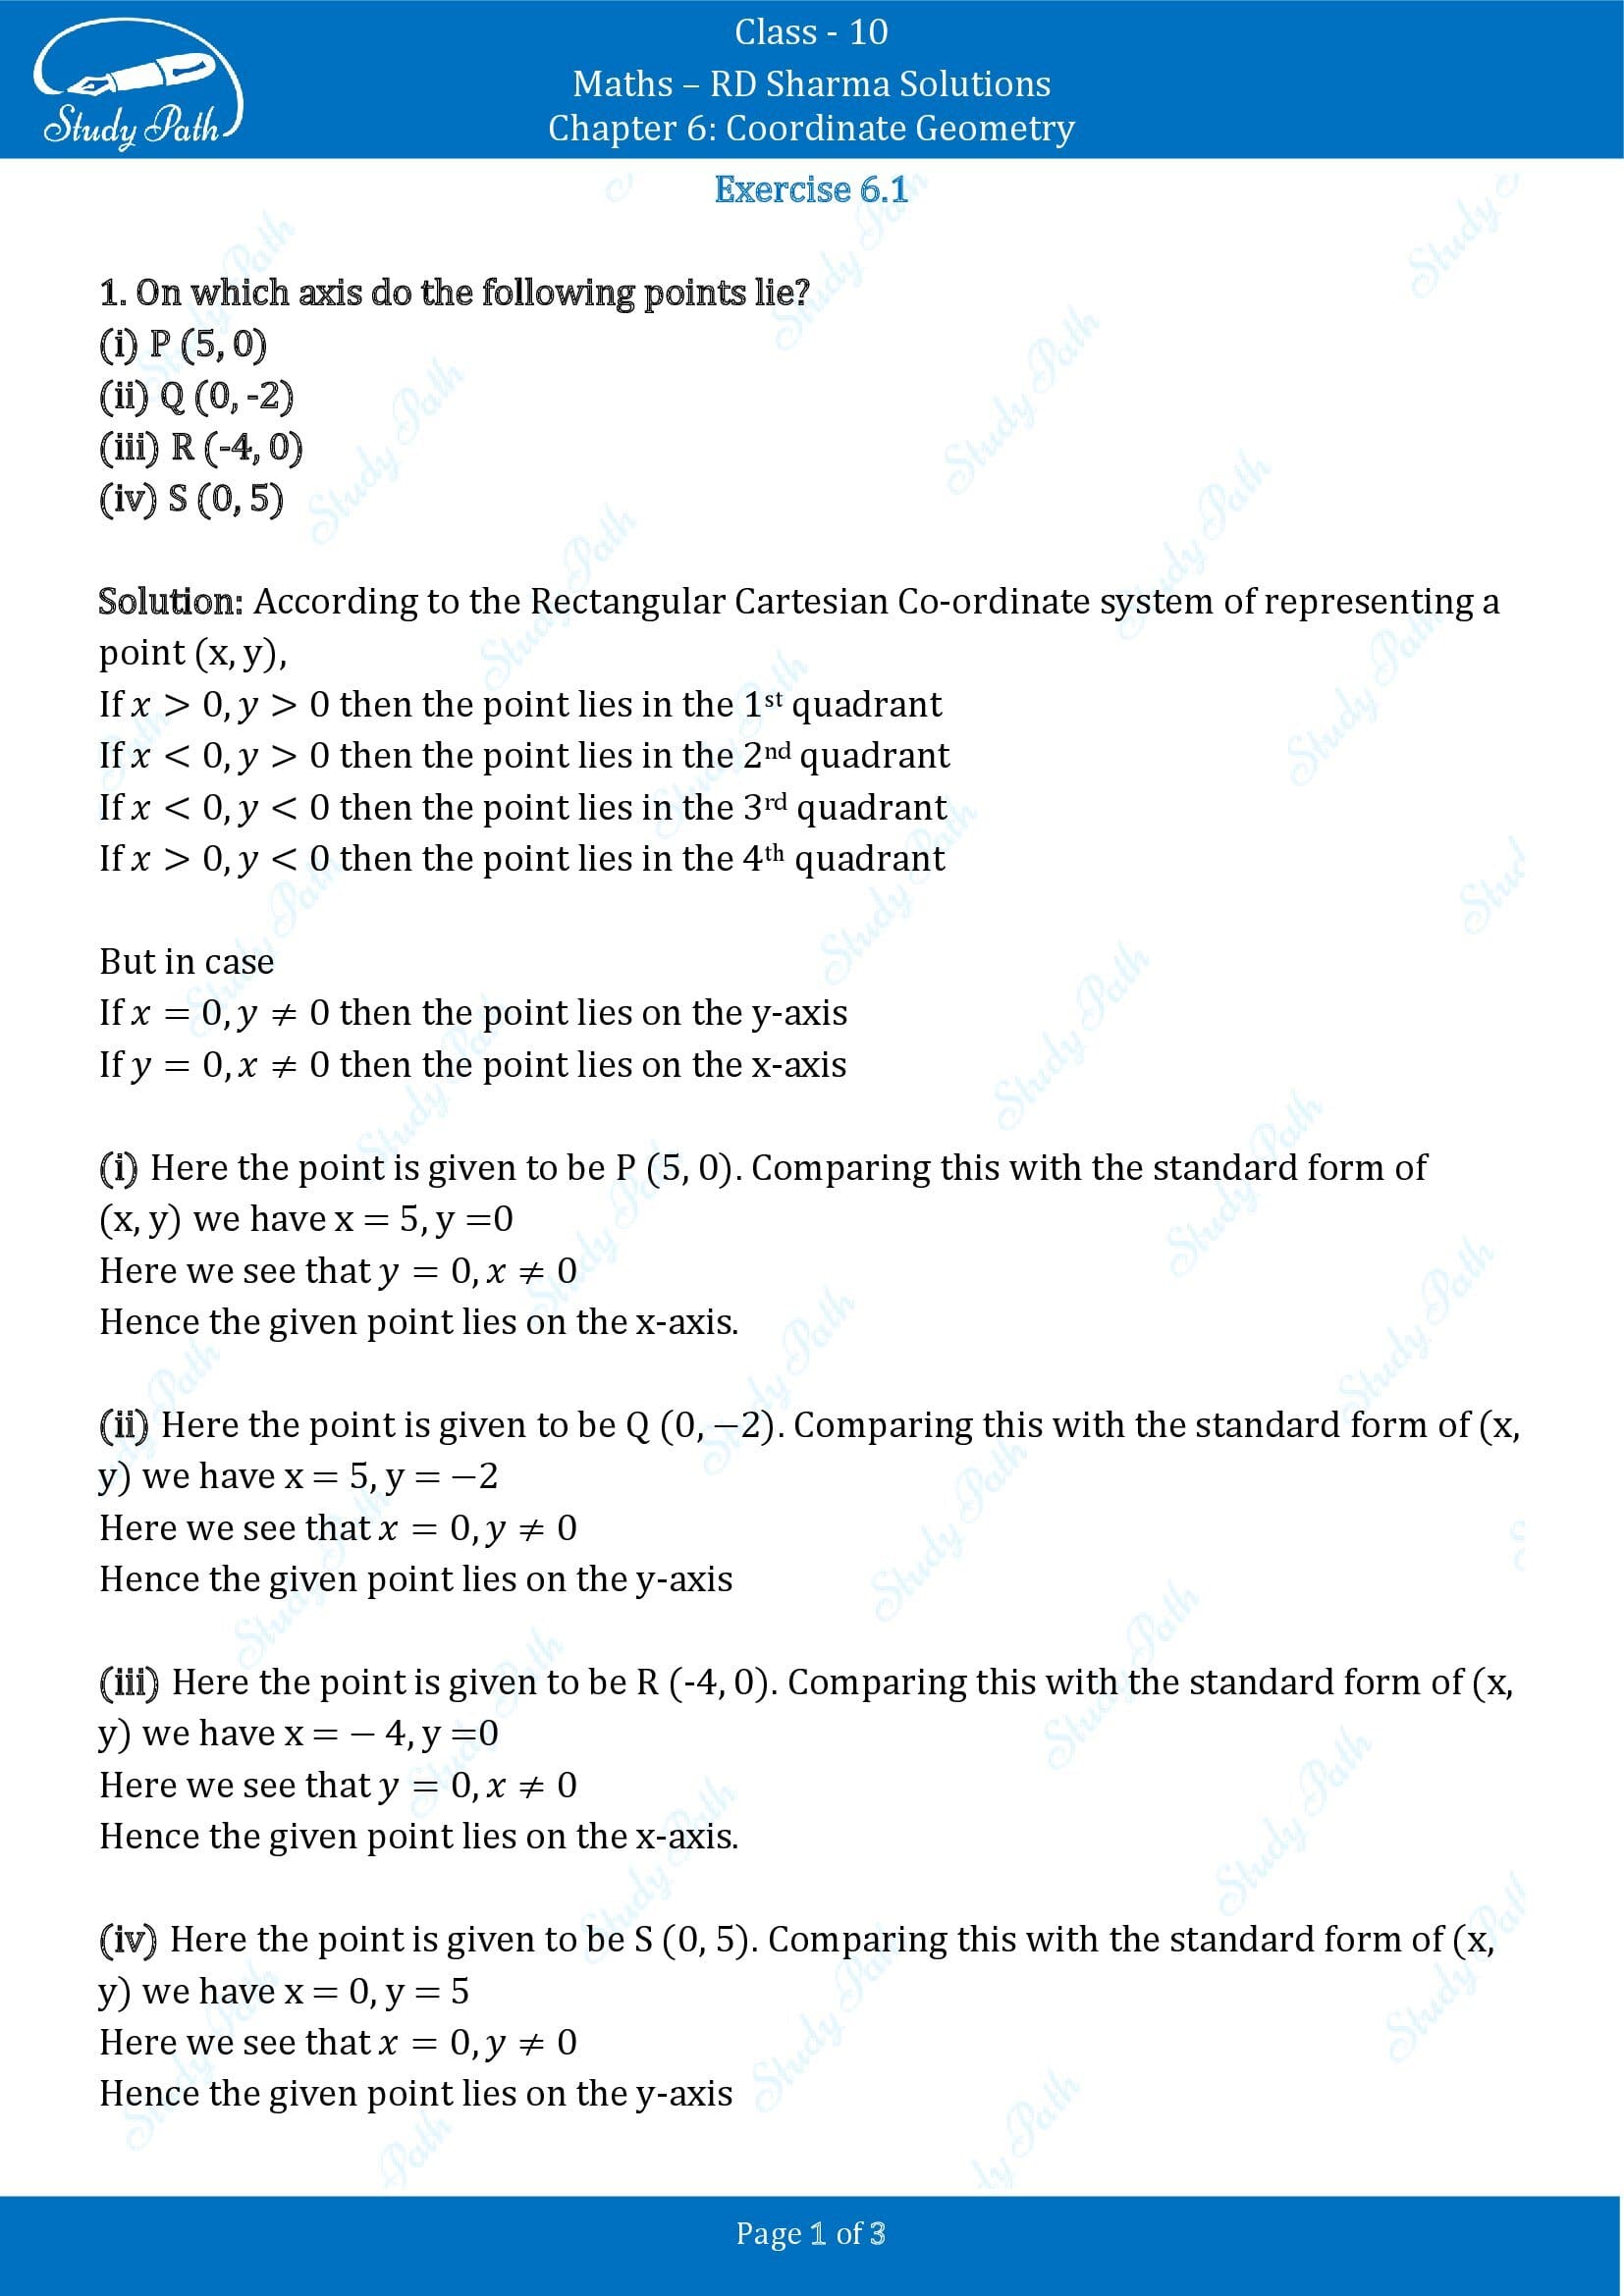 RD Sharma Solutions Class 10 Chapter 6 Coordinate Geometry Exercise 6.1 00001